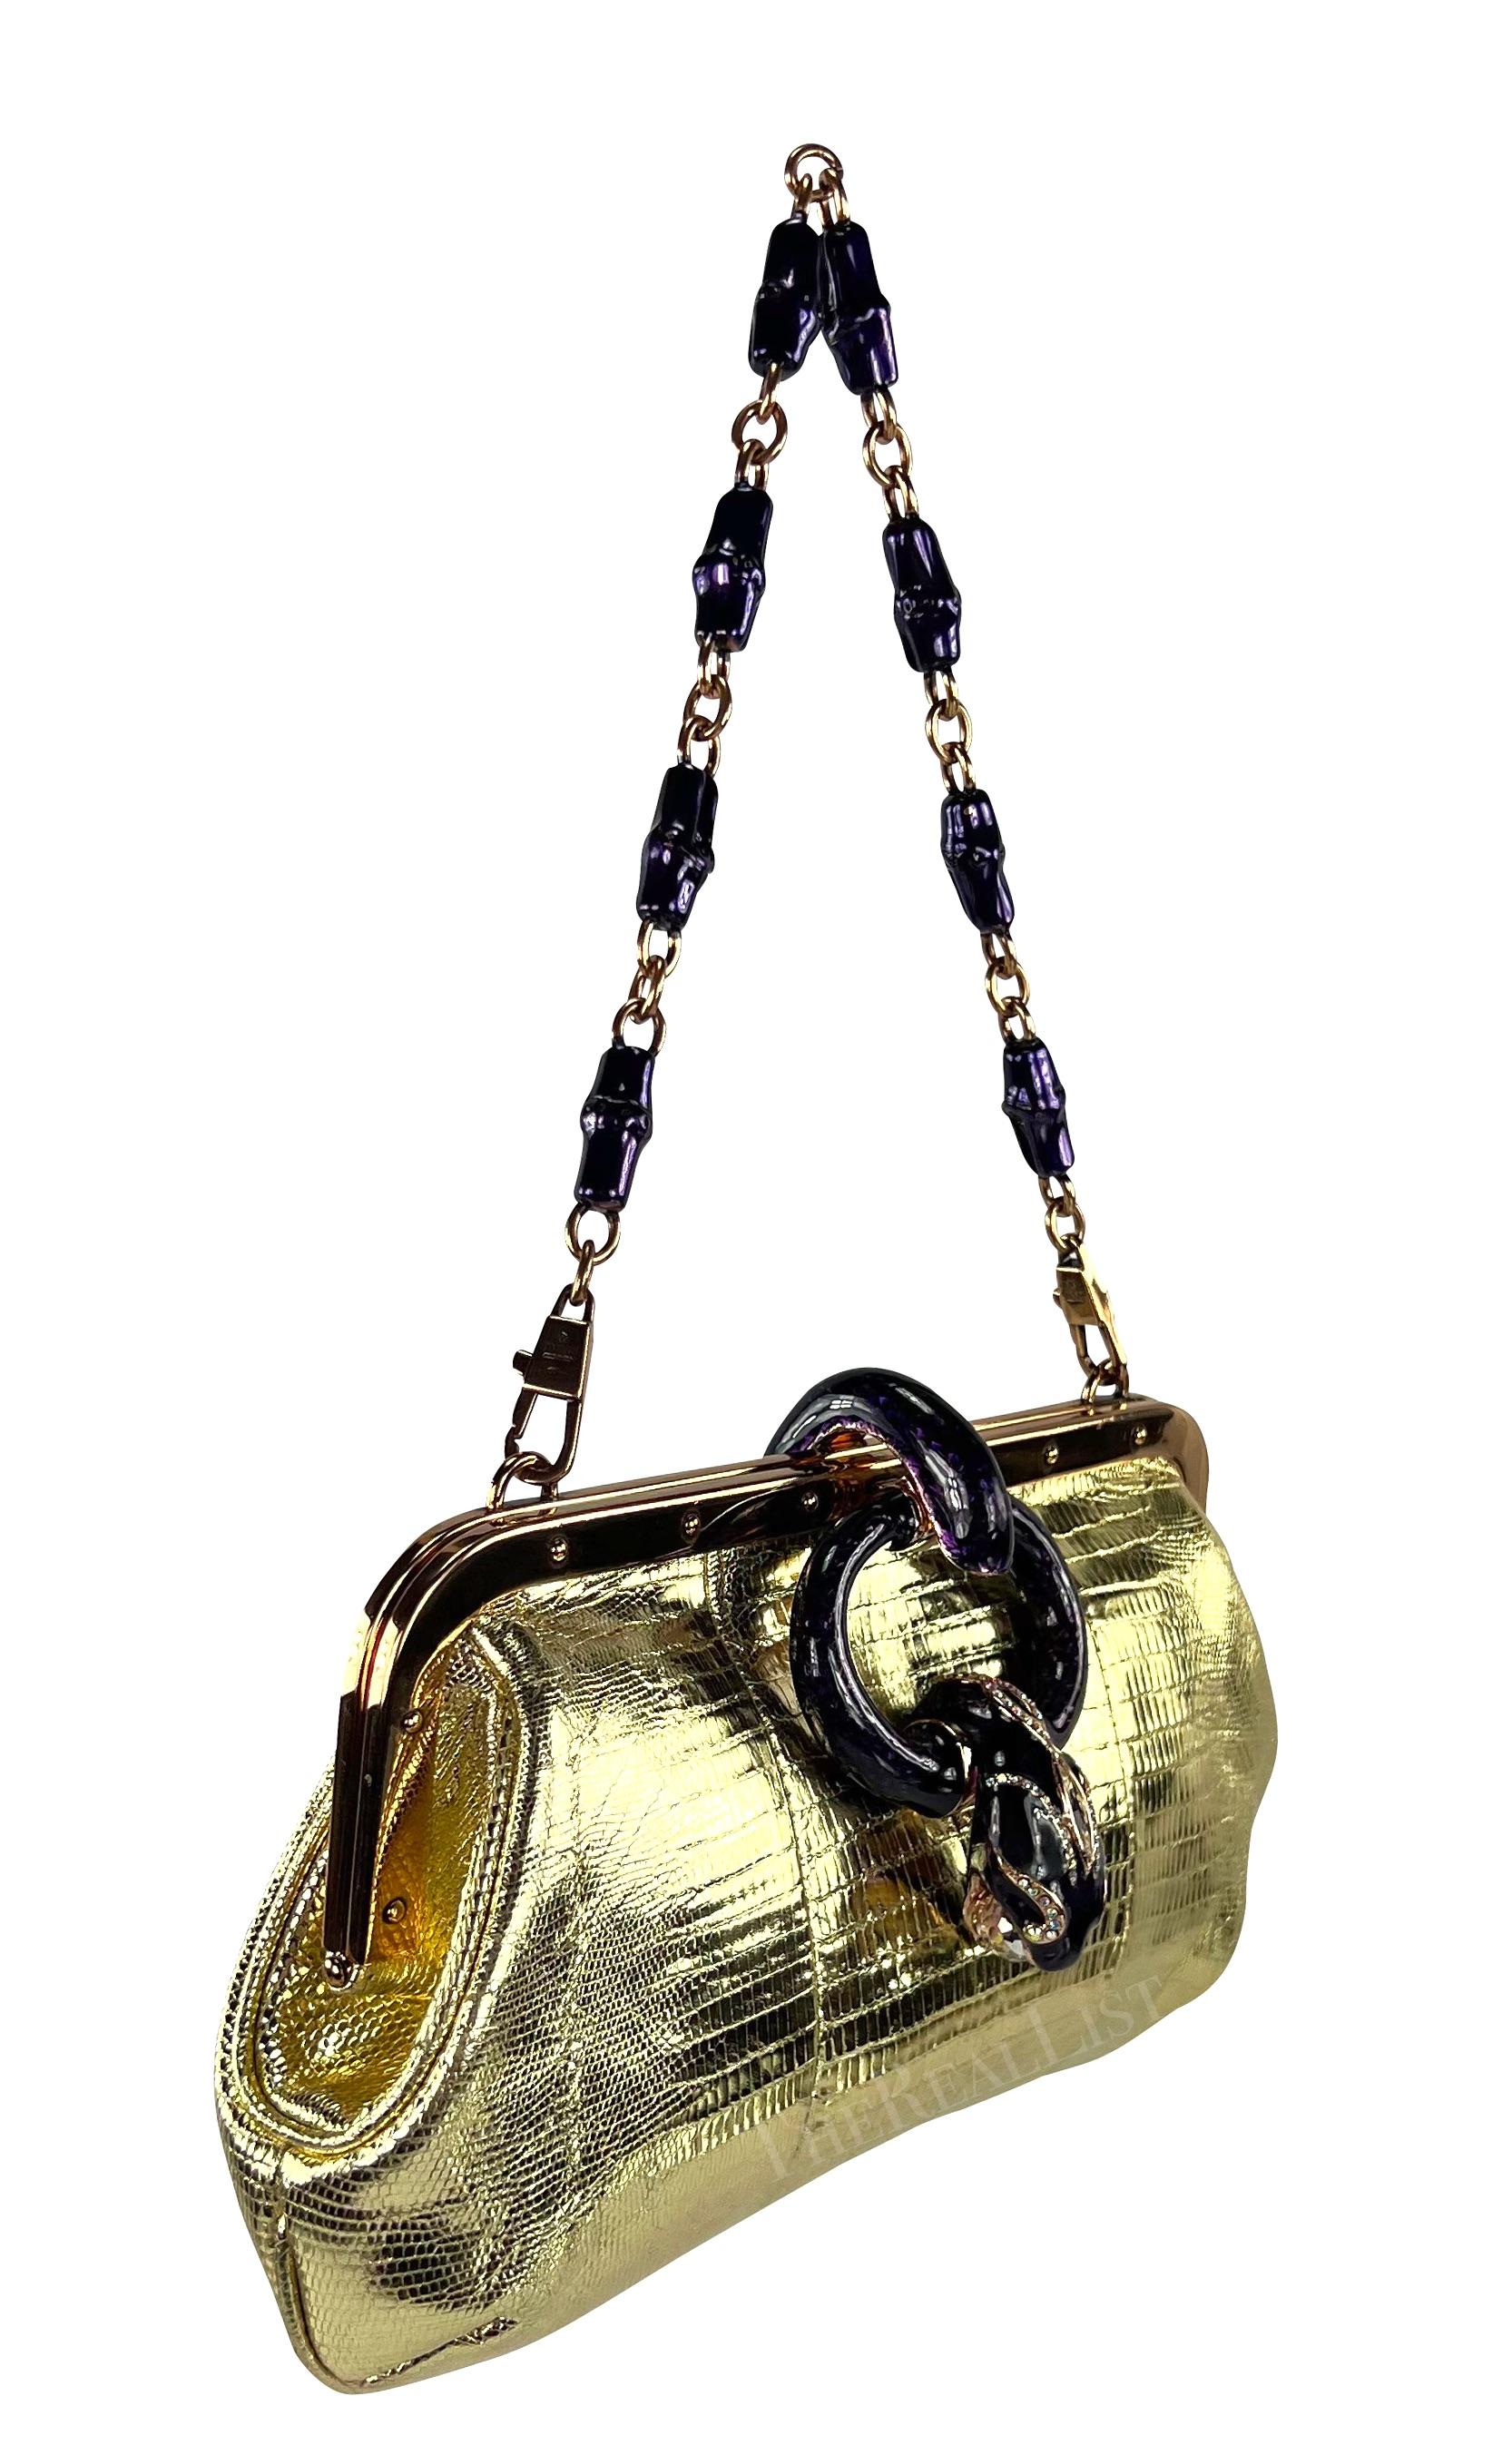 S/S  2004 Gucci by Tom Ford Gold Lizard Leather Enamel Snake Mini Bag 8